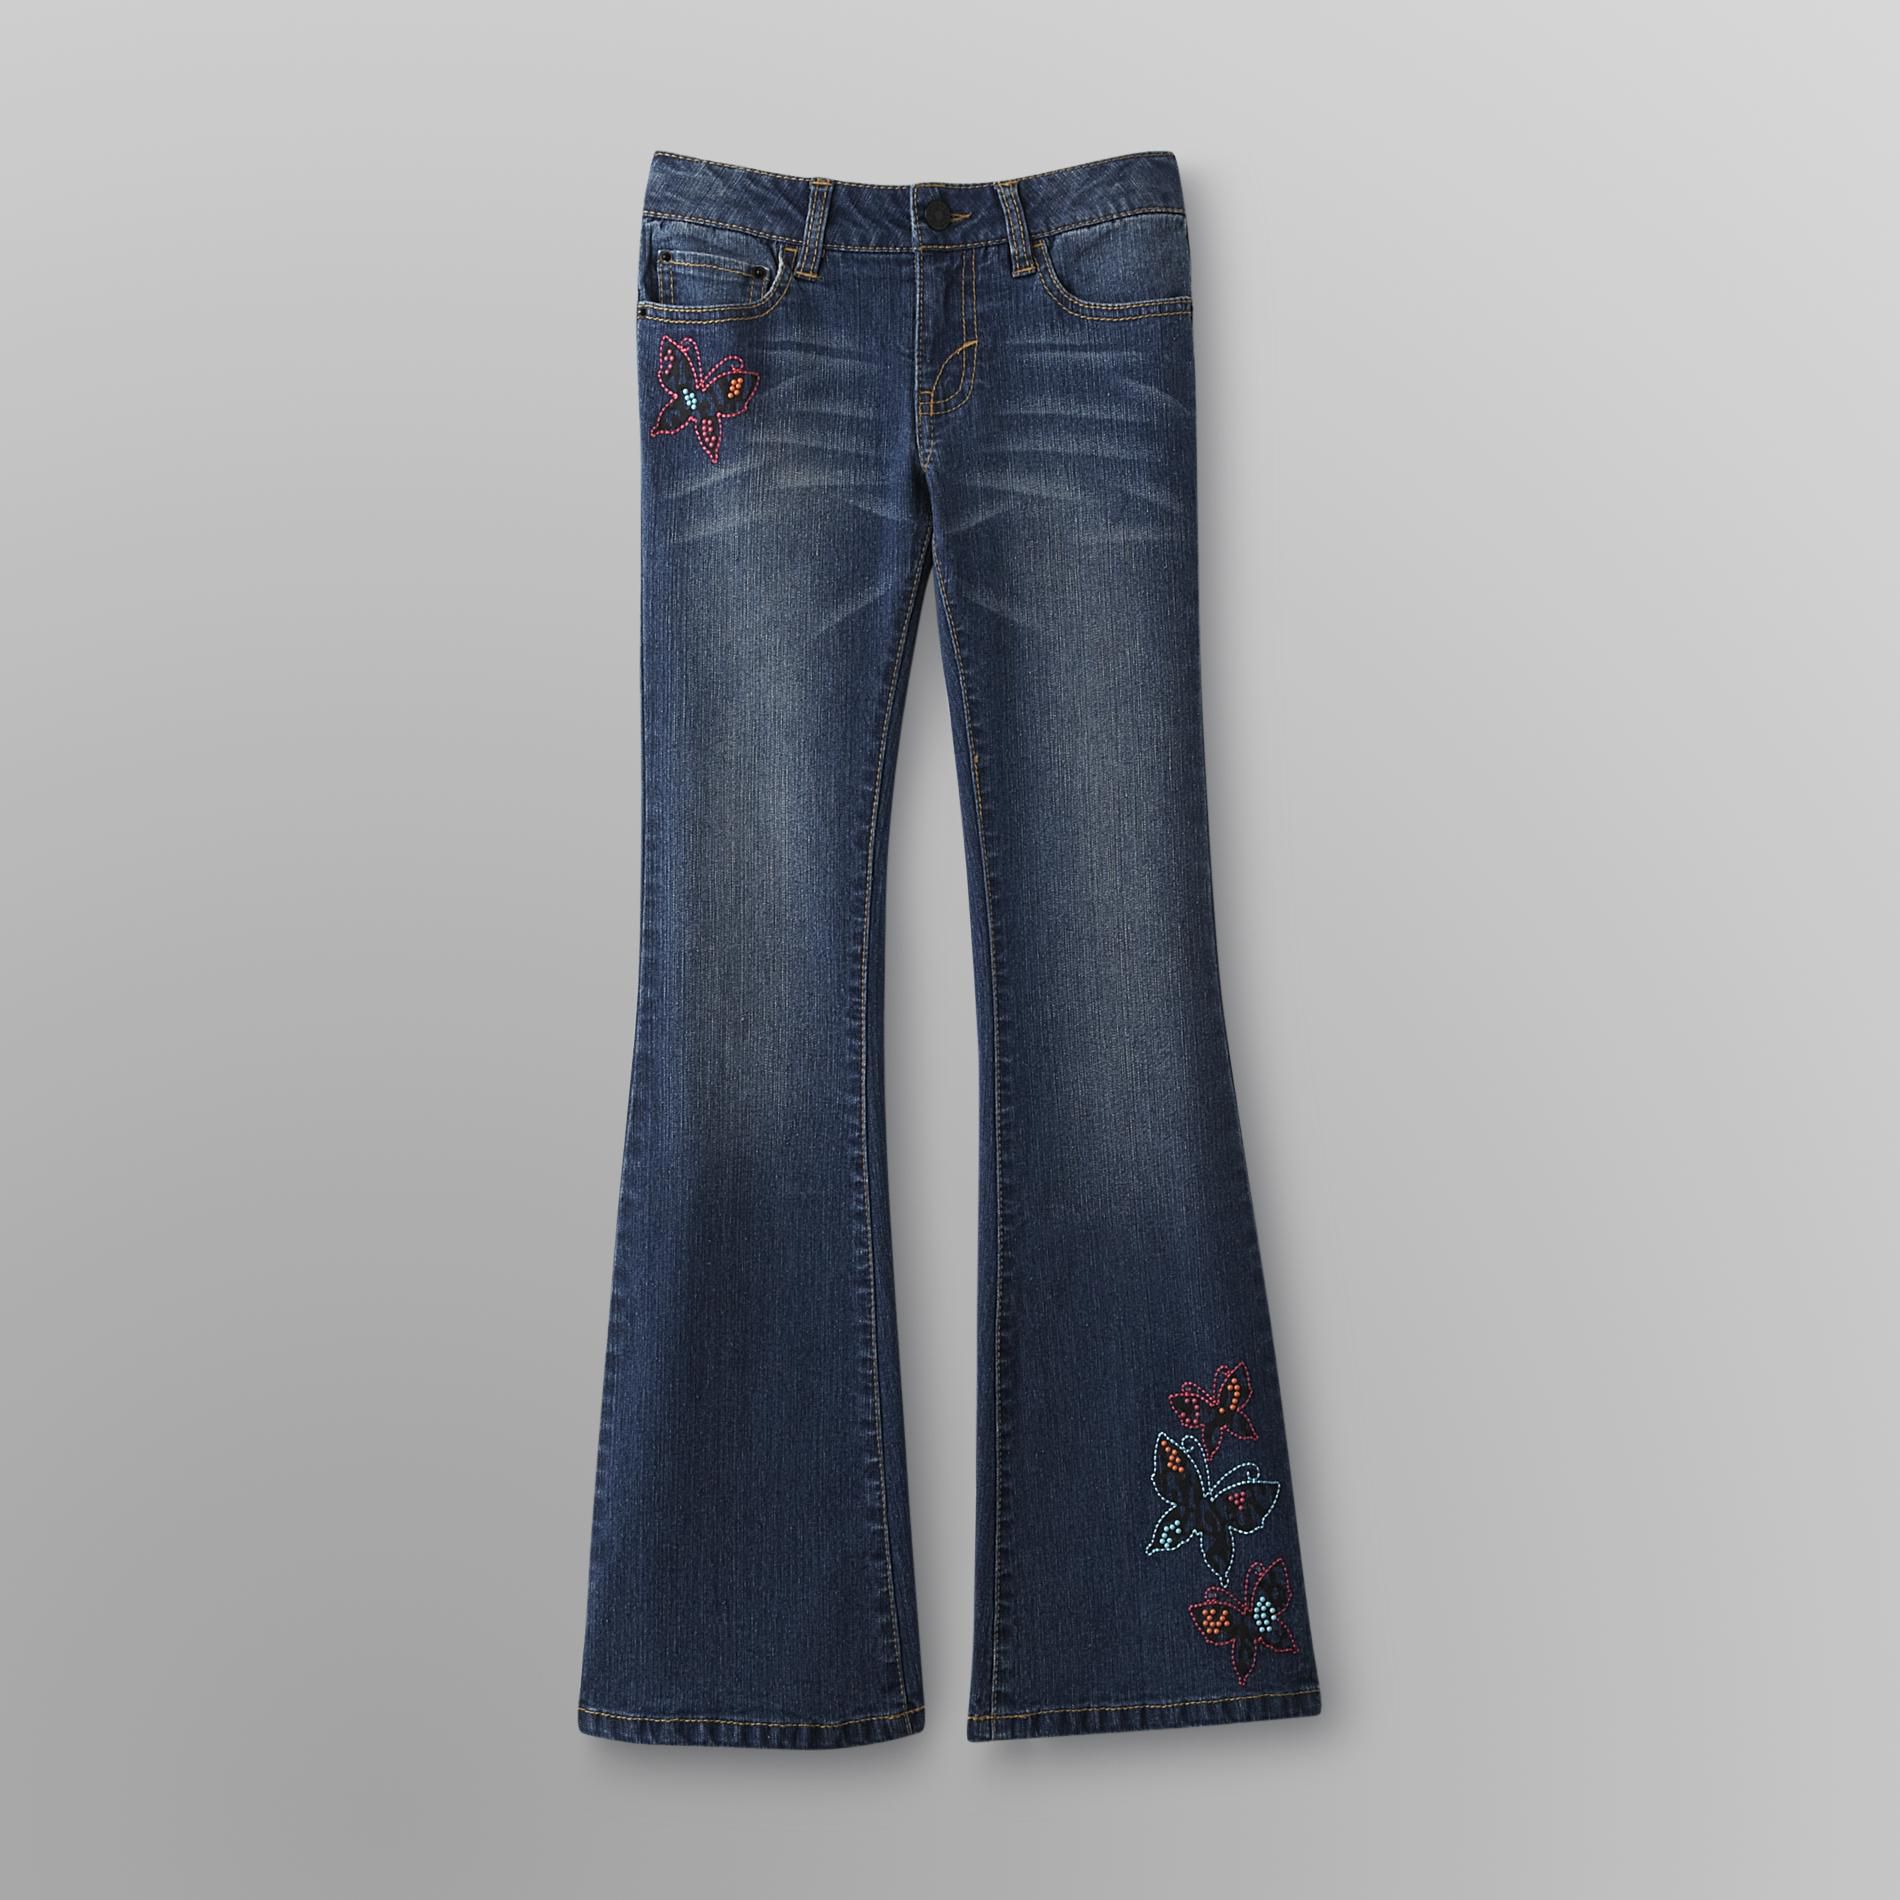 Canyon River Blues Girl's Studded Flare Jeans - Butterflies